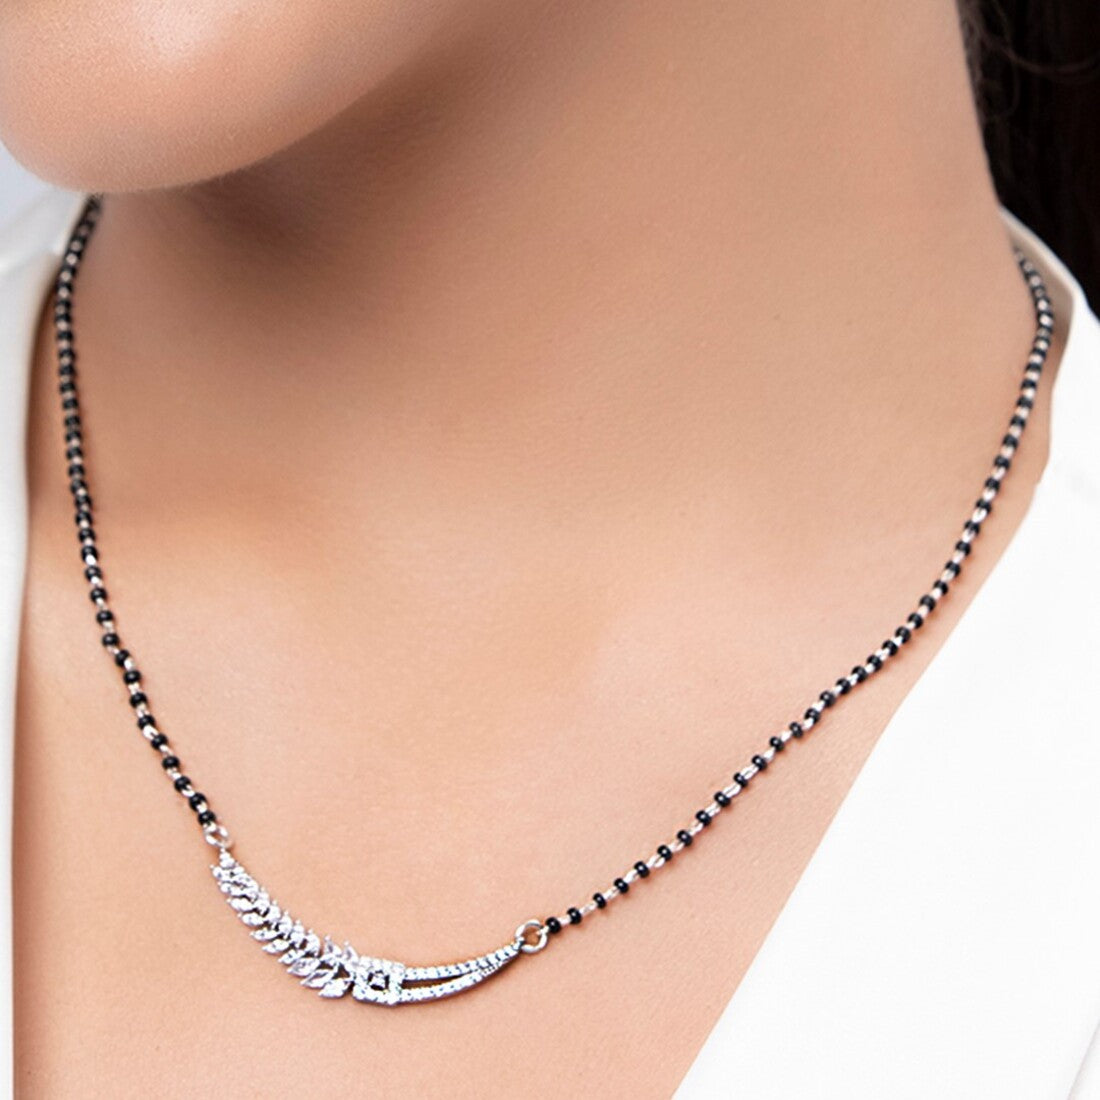 Floral Leaf Style 925 Silver Mangalsutra